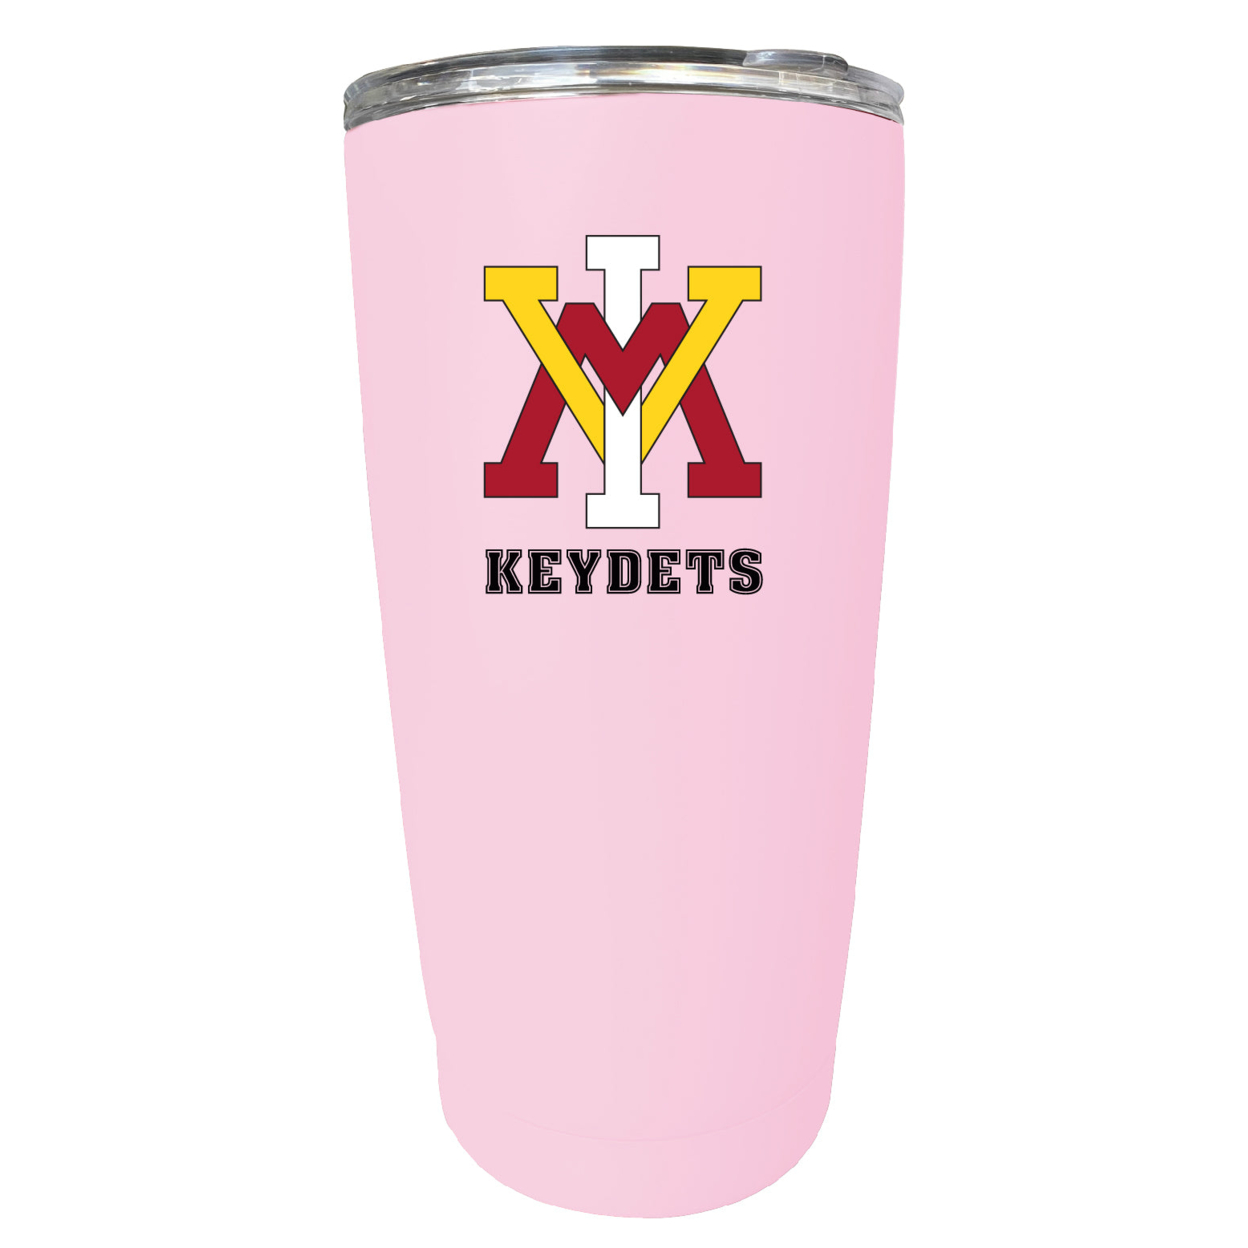 VMI Keydets 16 Oz Stainless Steel Insulated Tumbler - Pink